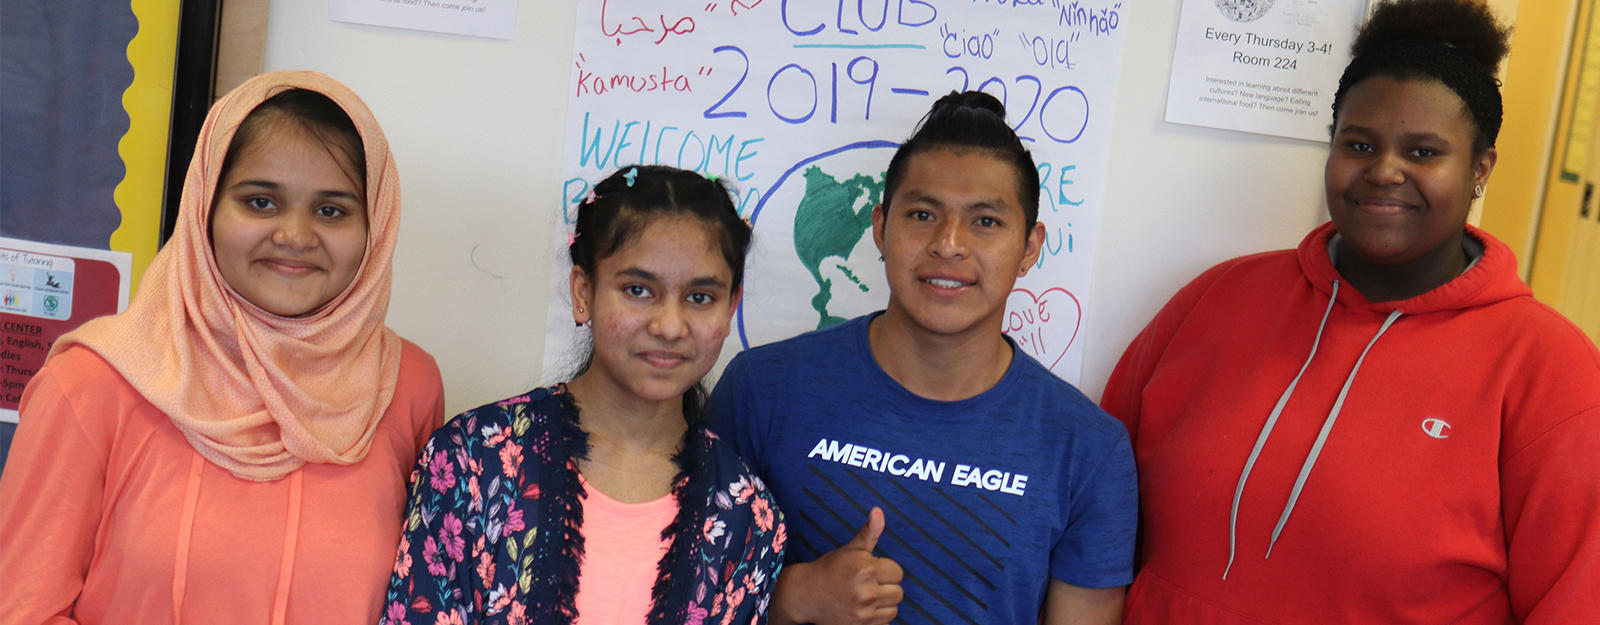 Students posing in front of a poster for international clubs.